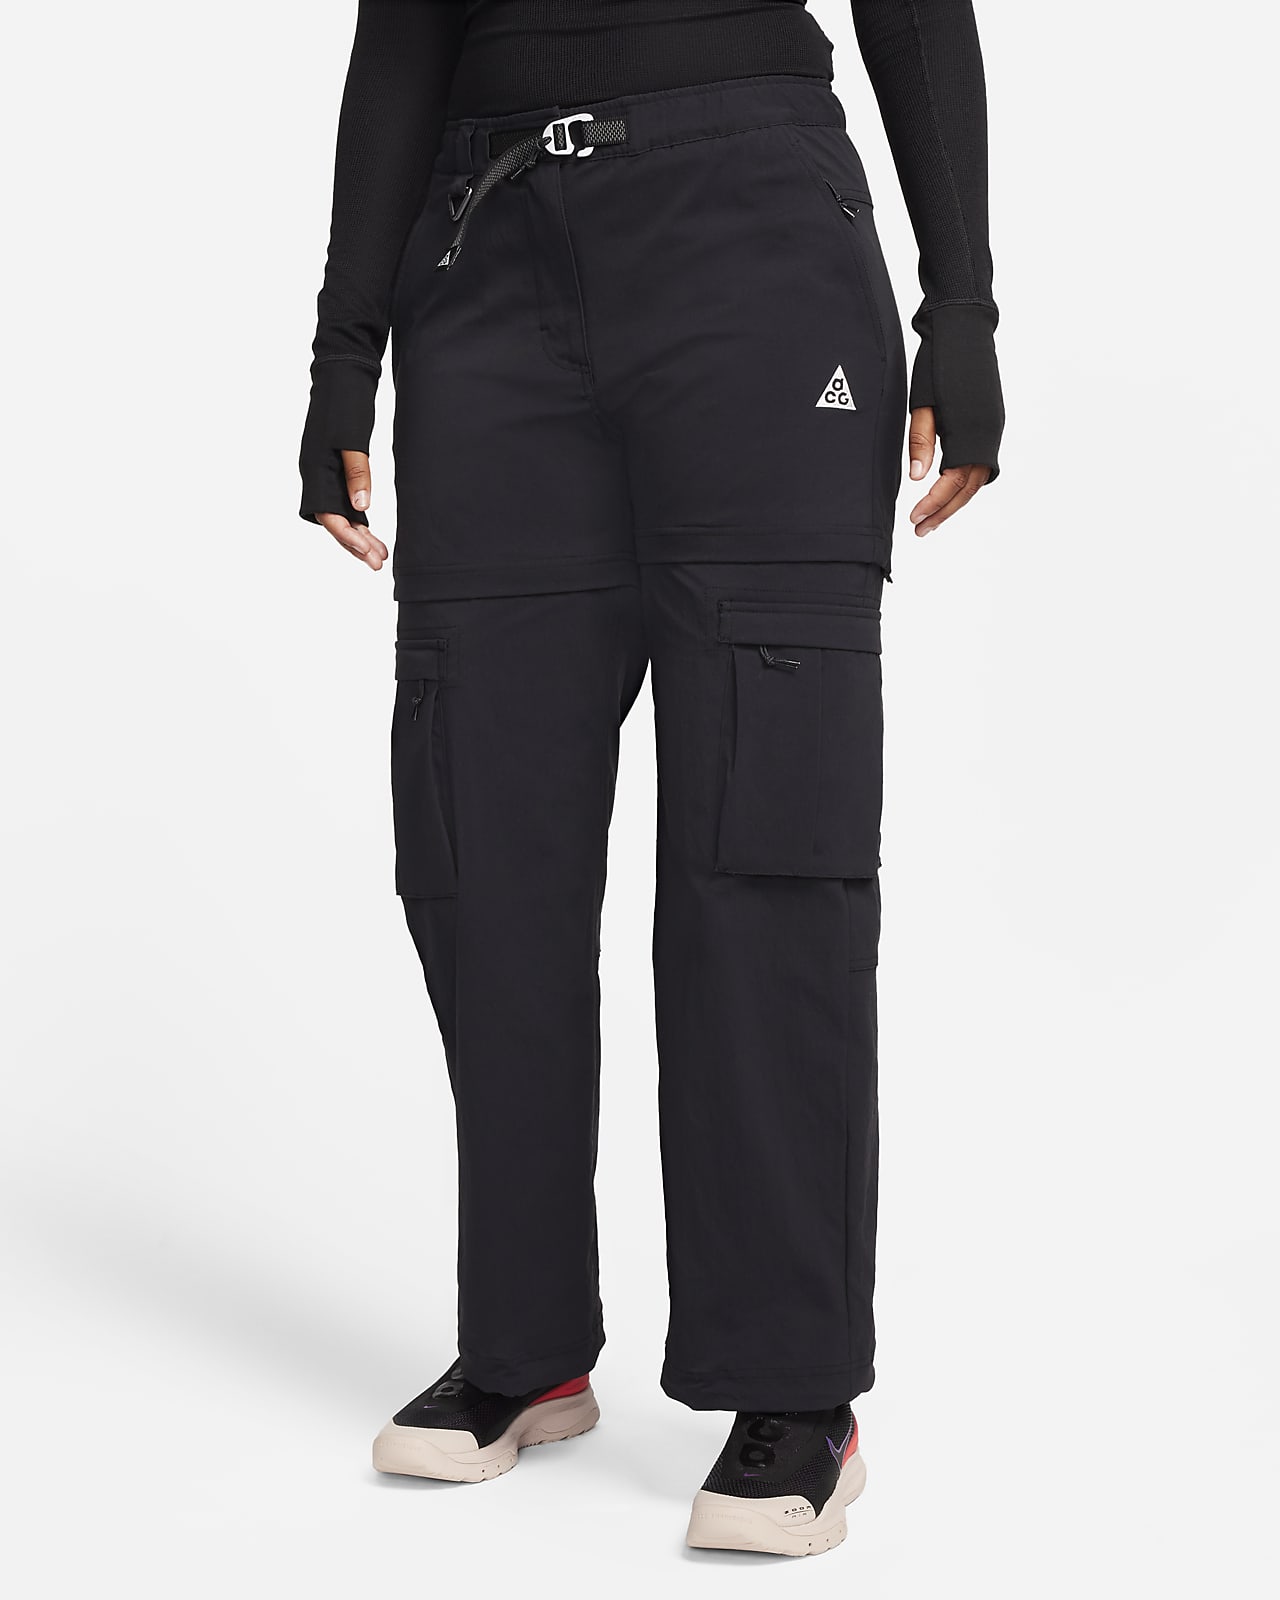 Womens Under Armour Pants XL Sale India - Under Armour Outlet